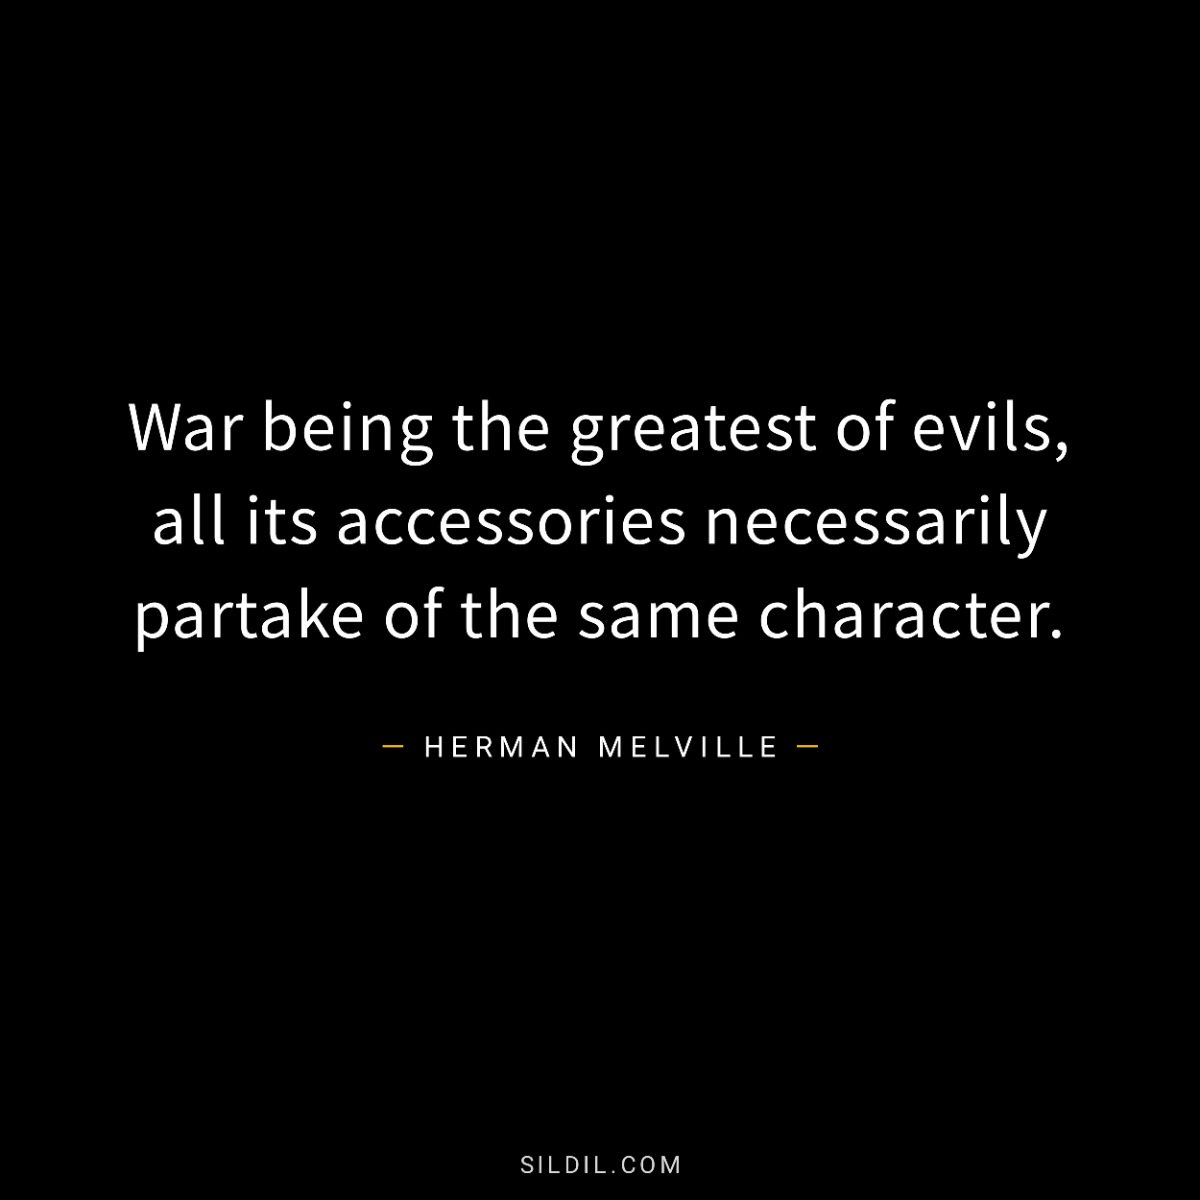 War being the greatest of evils, all its accessories necessarily partake of the same character.